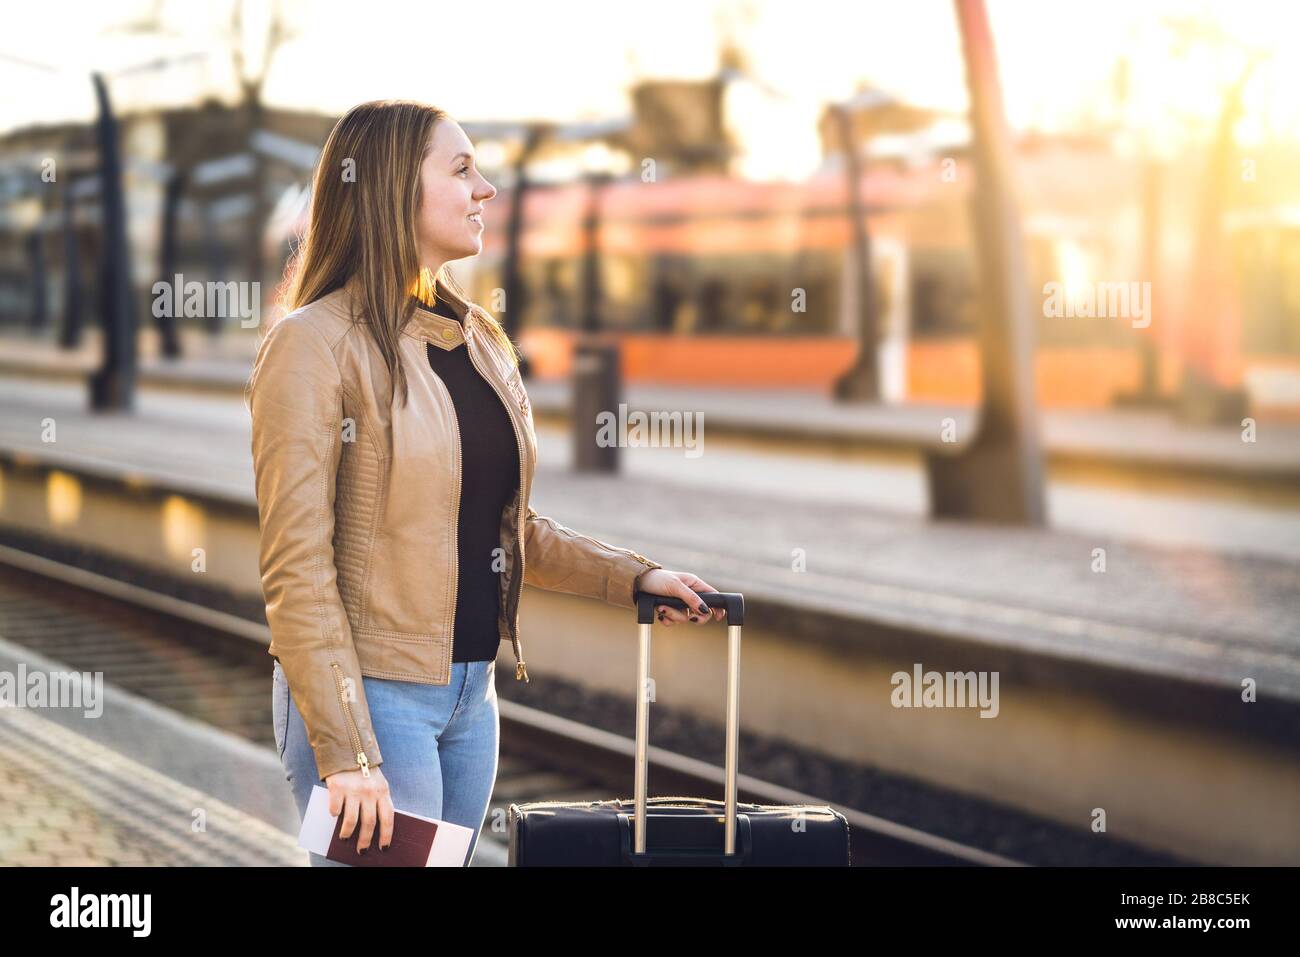 Smiling woman with luggage in train station. Happy lady standing with suitcase, passport and ticket at platform. Railway travel and lifestyle concept. Stock Photo